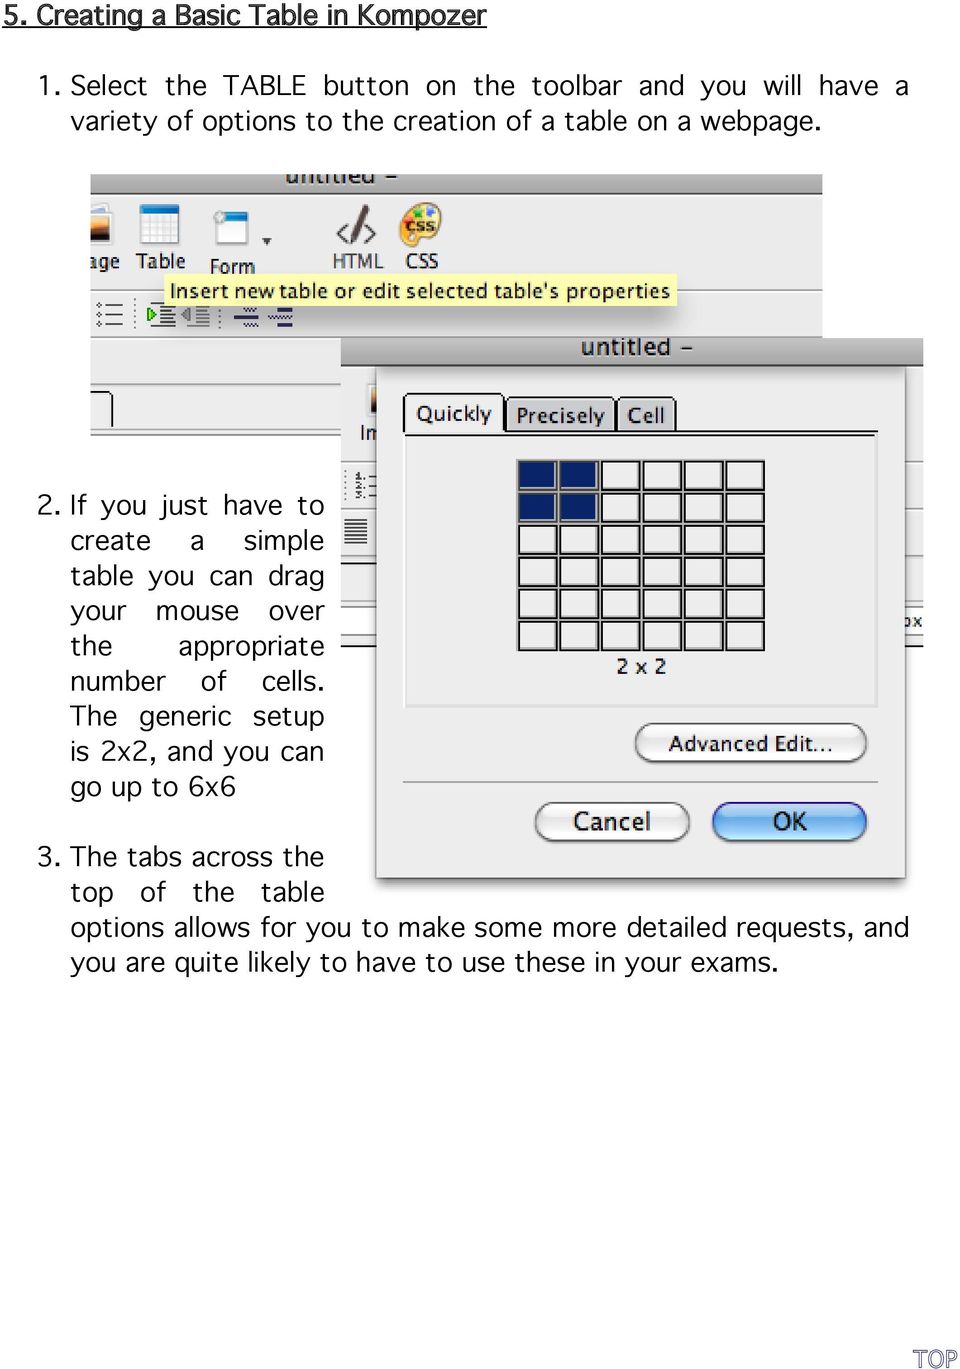 2. If you just have to create a simple table you can drag your mouse over the appropriate number of cells.